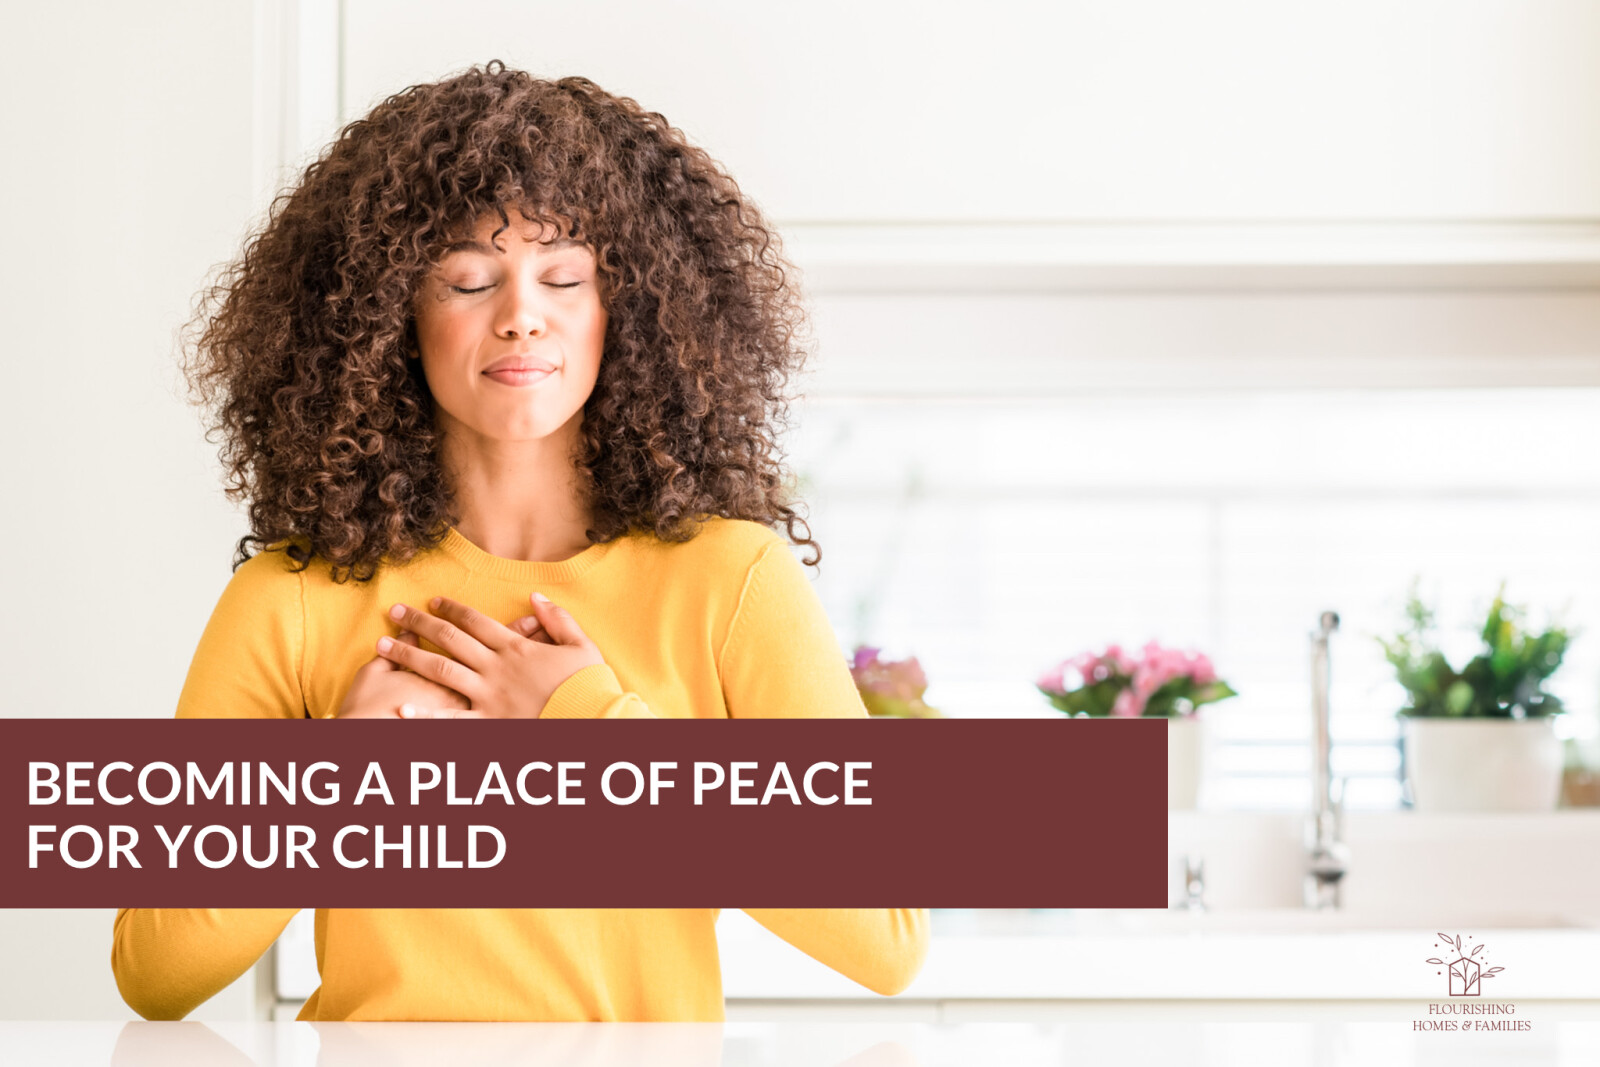 BECOMING A PLACE OF PEACE FOR YOUR CHILD